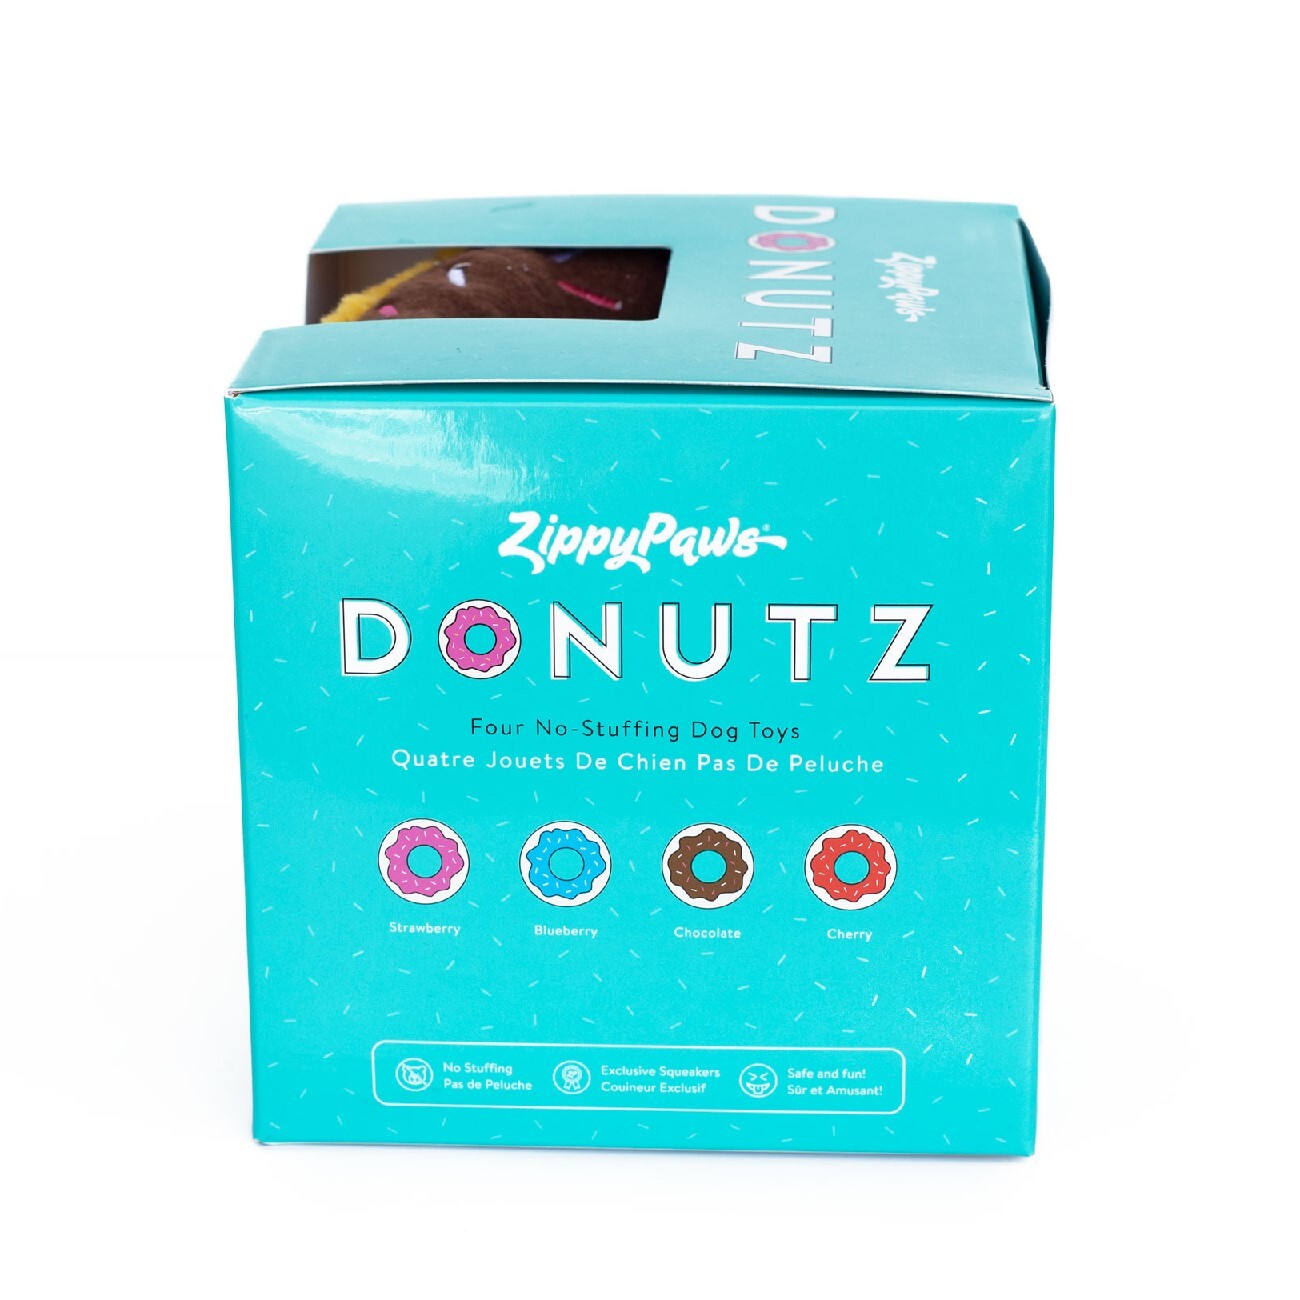 Zippy Paws Donutz Plush Squeaker Dog Toy - Gift Box with 4 Donuts image 1